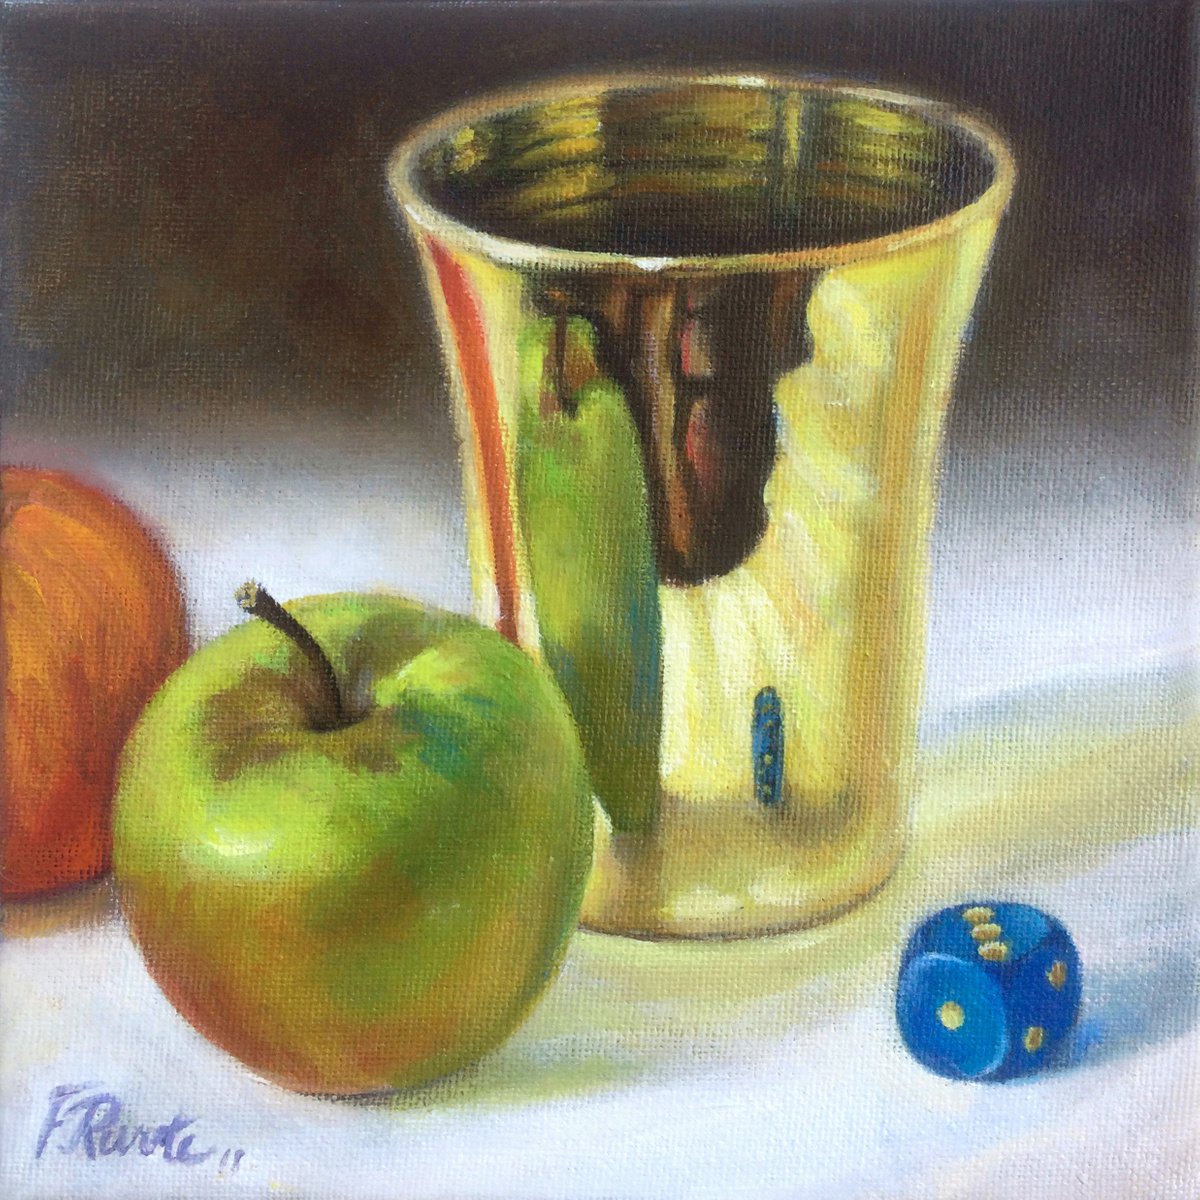 Goblet and Apples by Frederic Reverte